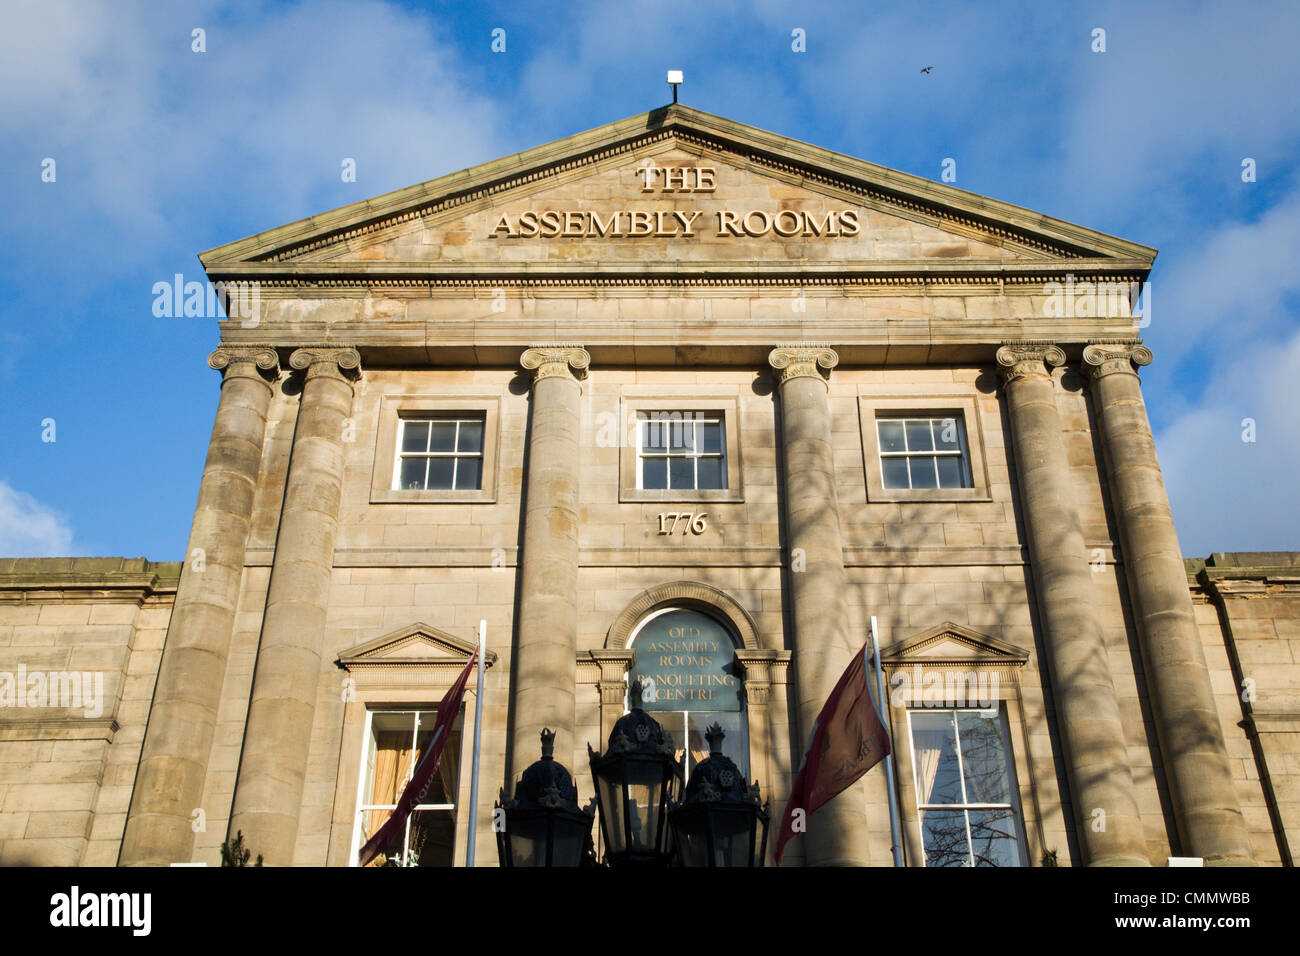 The Assembly Rooms, Newcastle upon Tyne, Tyne and Wear, England, United Kingdom, Europe Stock Photo